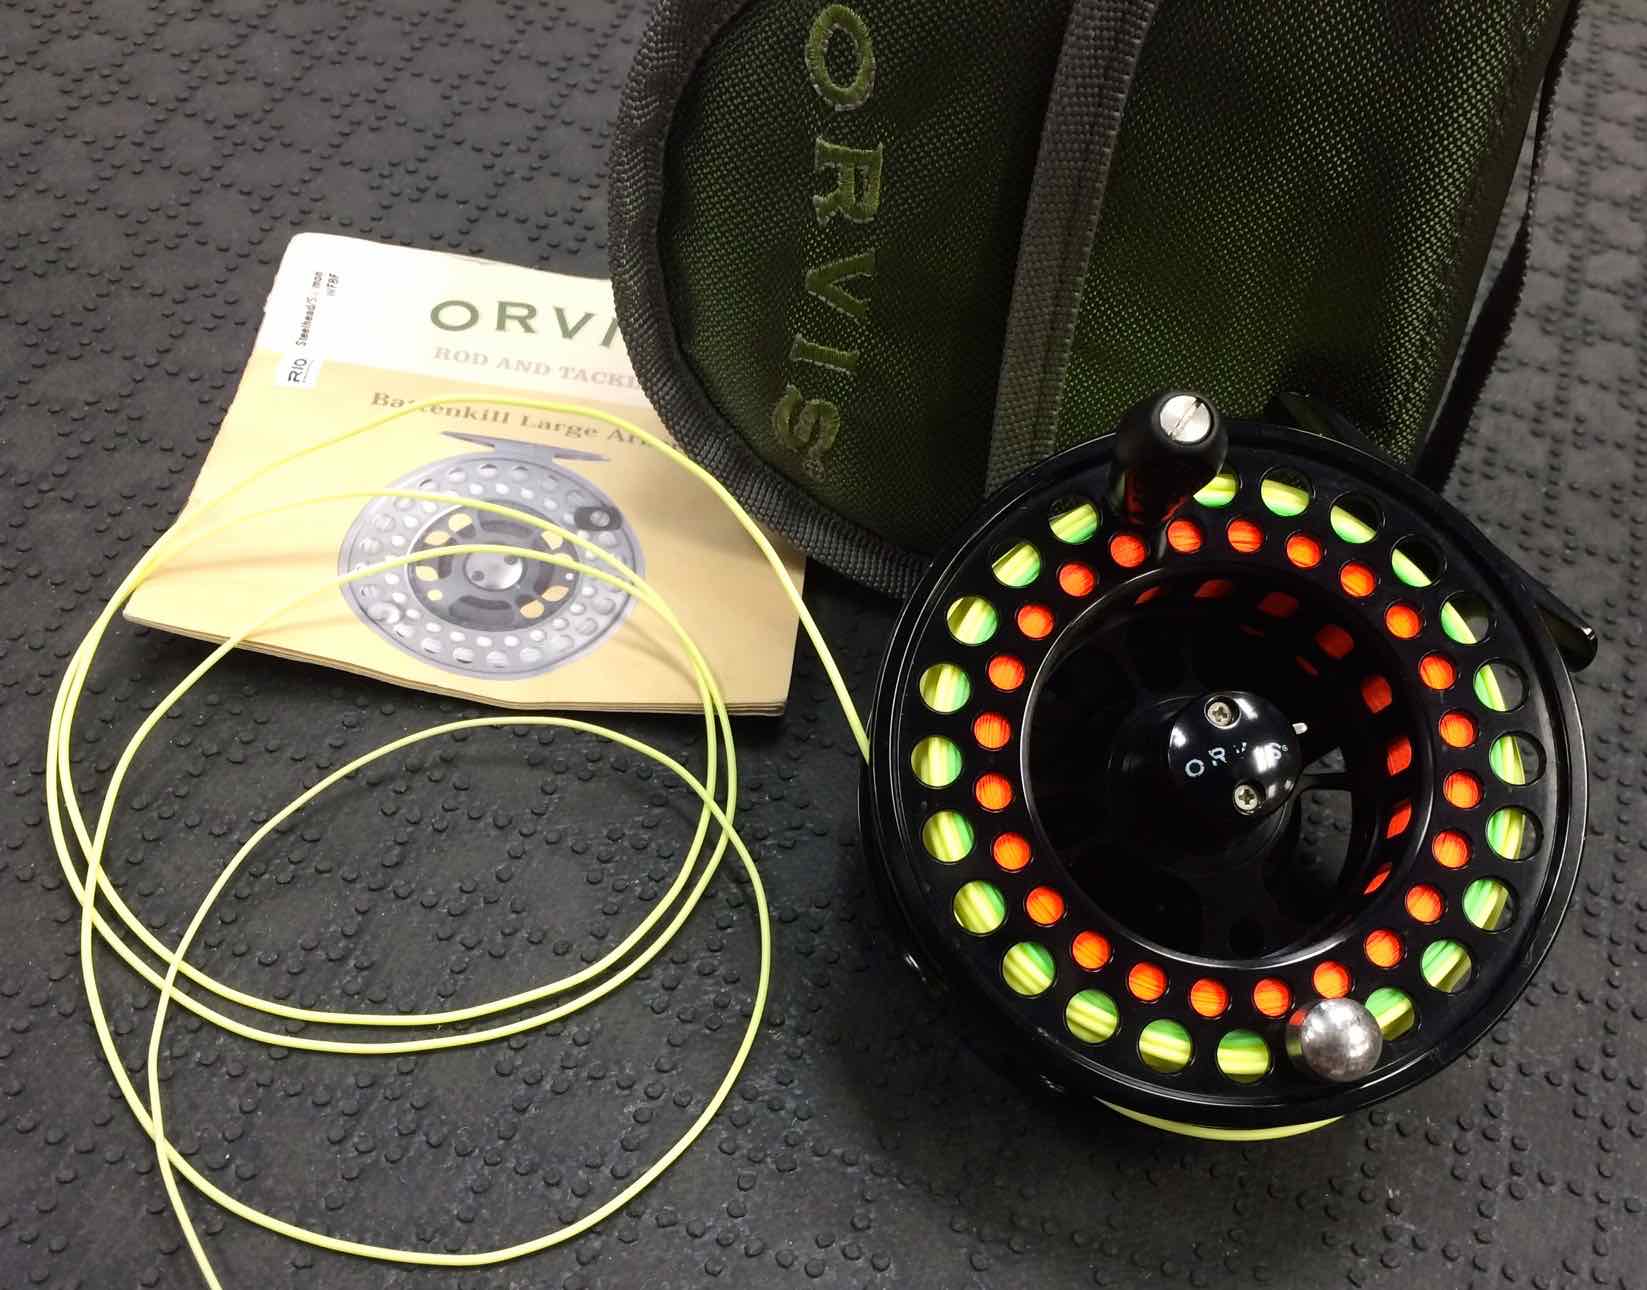 SOLD – Orvis Battenkill Large Arbor IV Fly Reel – C/w a RIO WF8